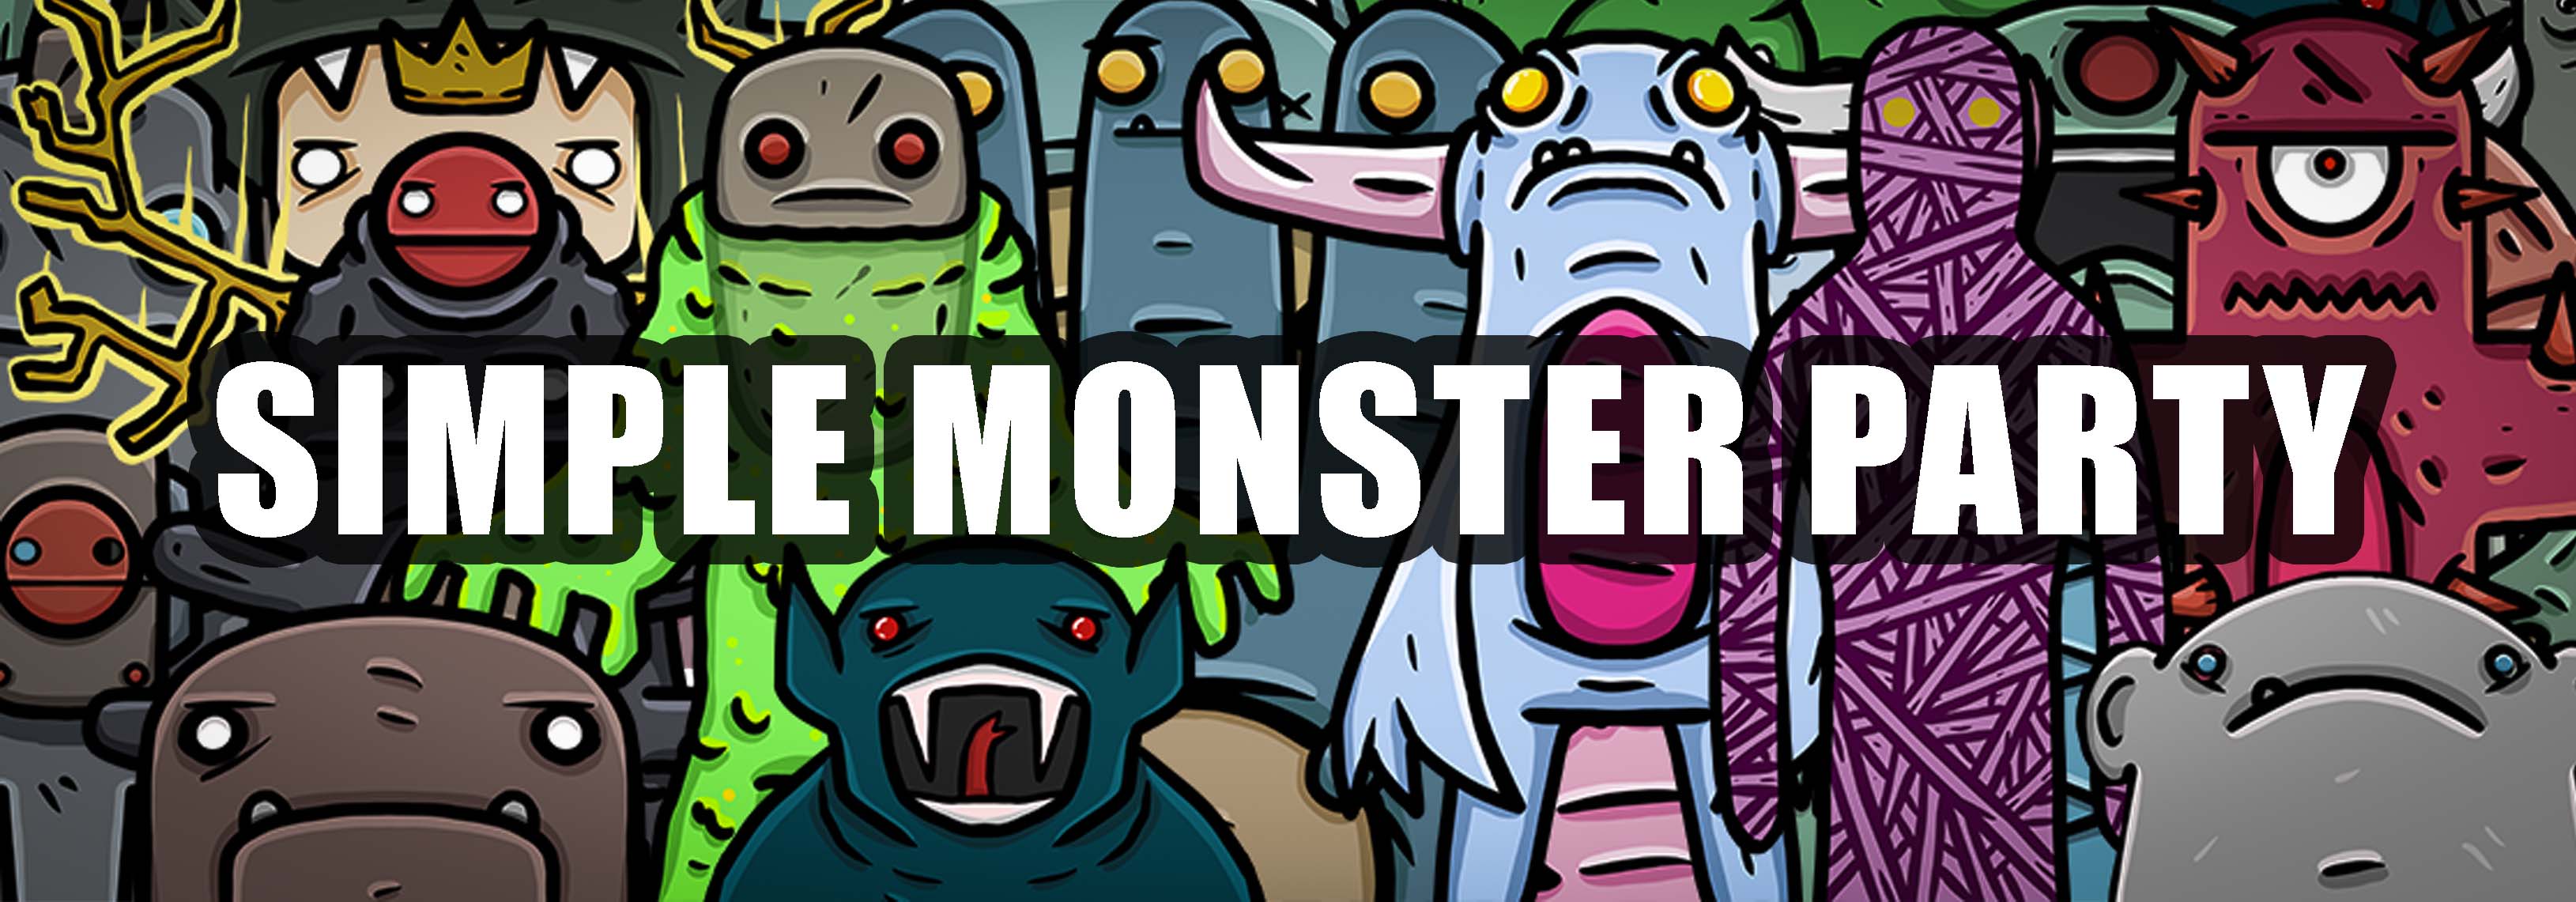 Simple Monster Party banner